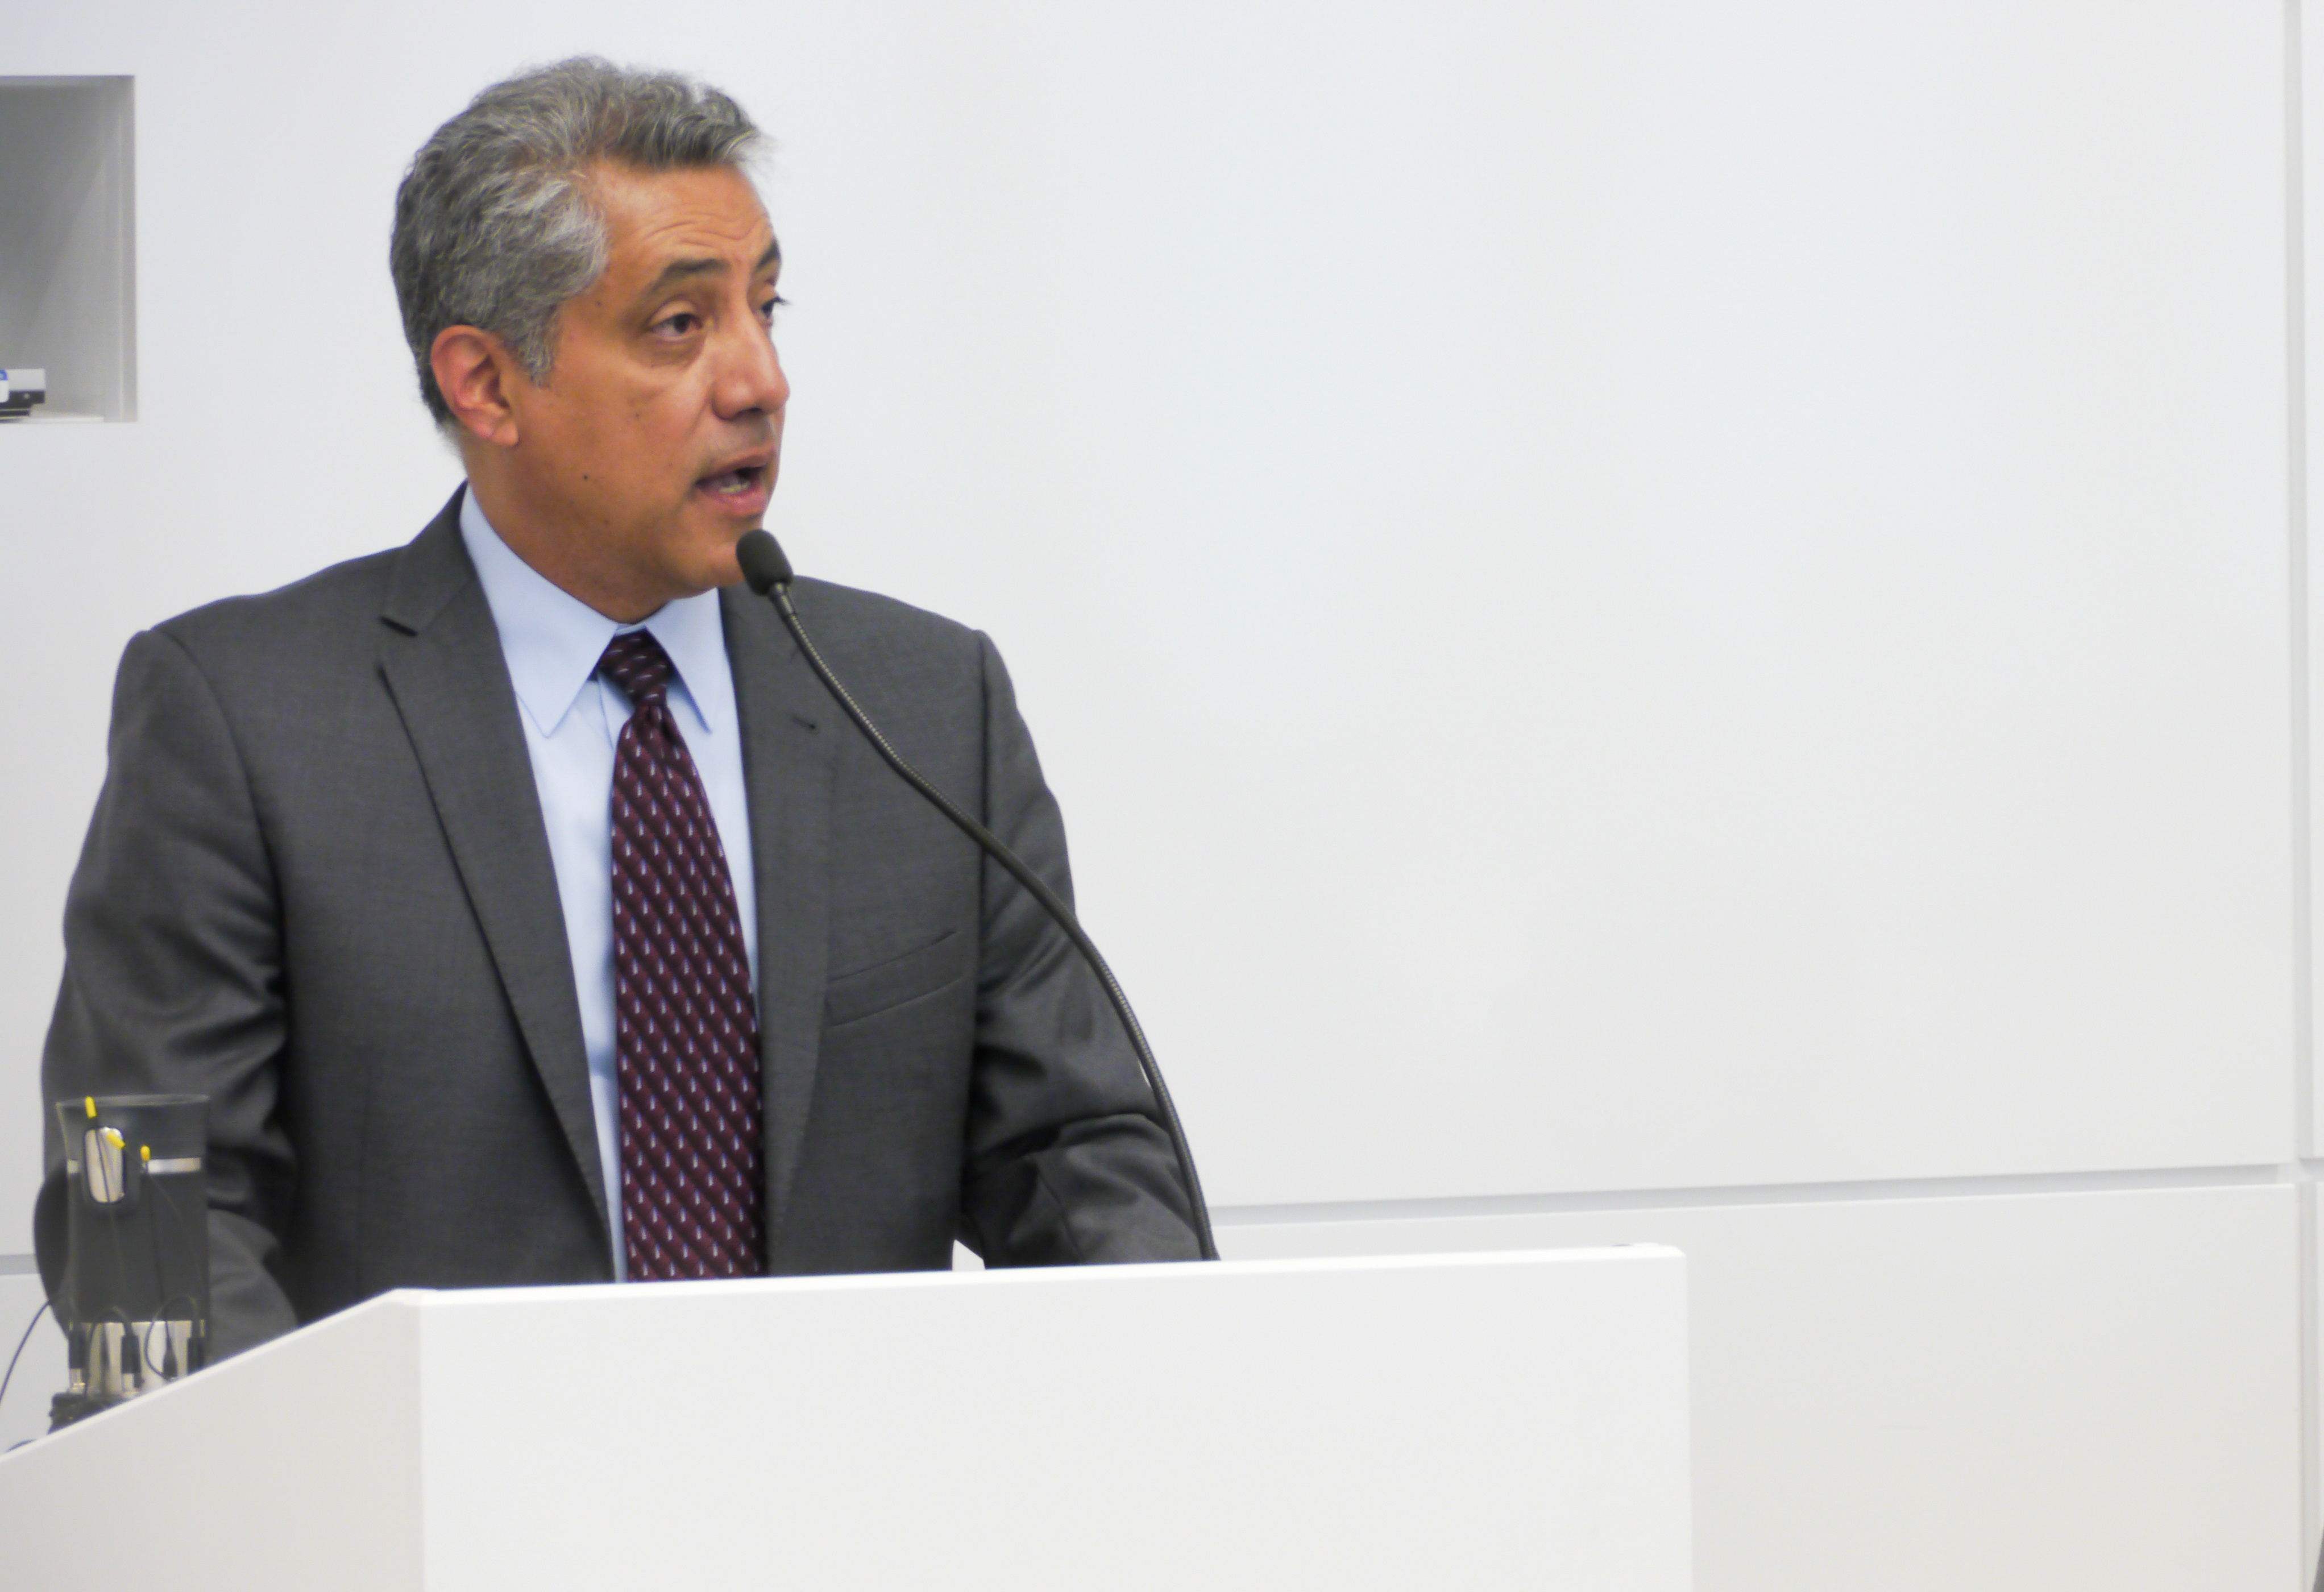 Image of Dr. Padilla speaking at the education forum.